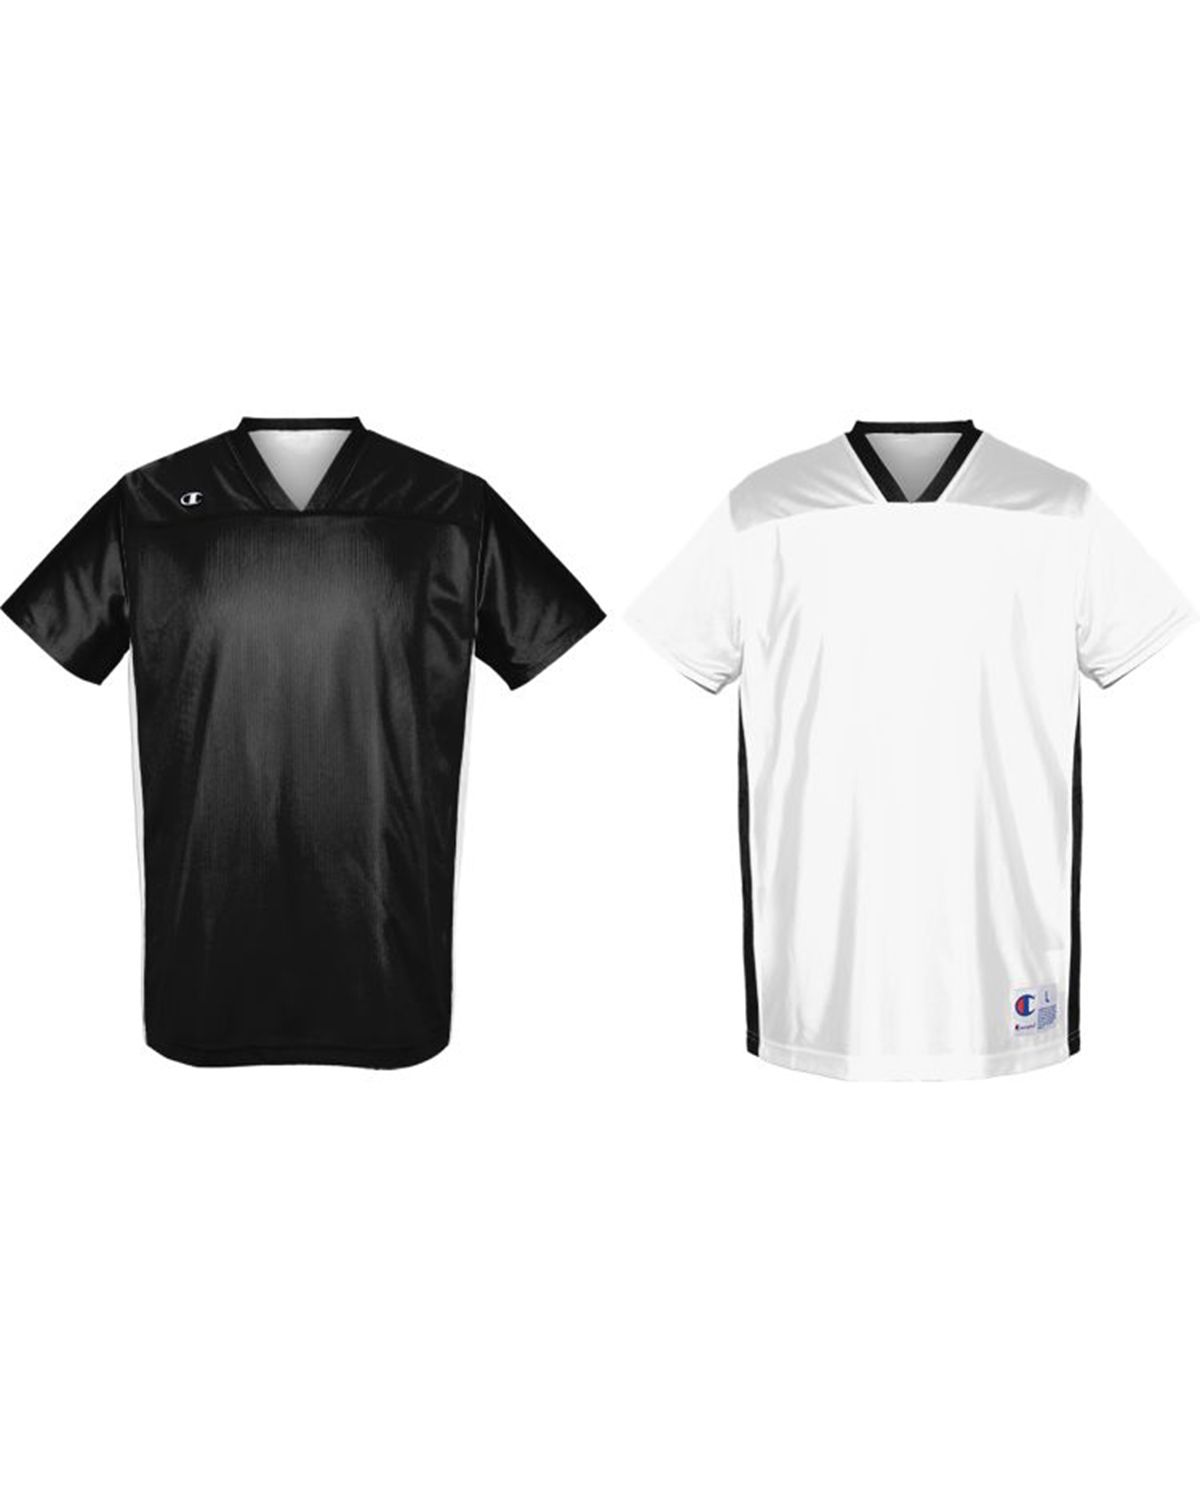 A4 NB4190 Youth Football Porthole Practice Jersey